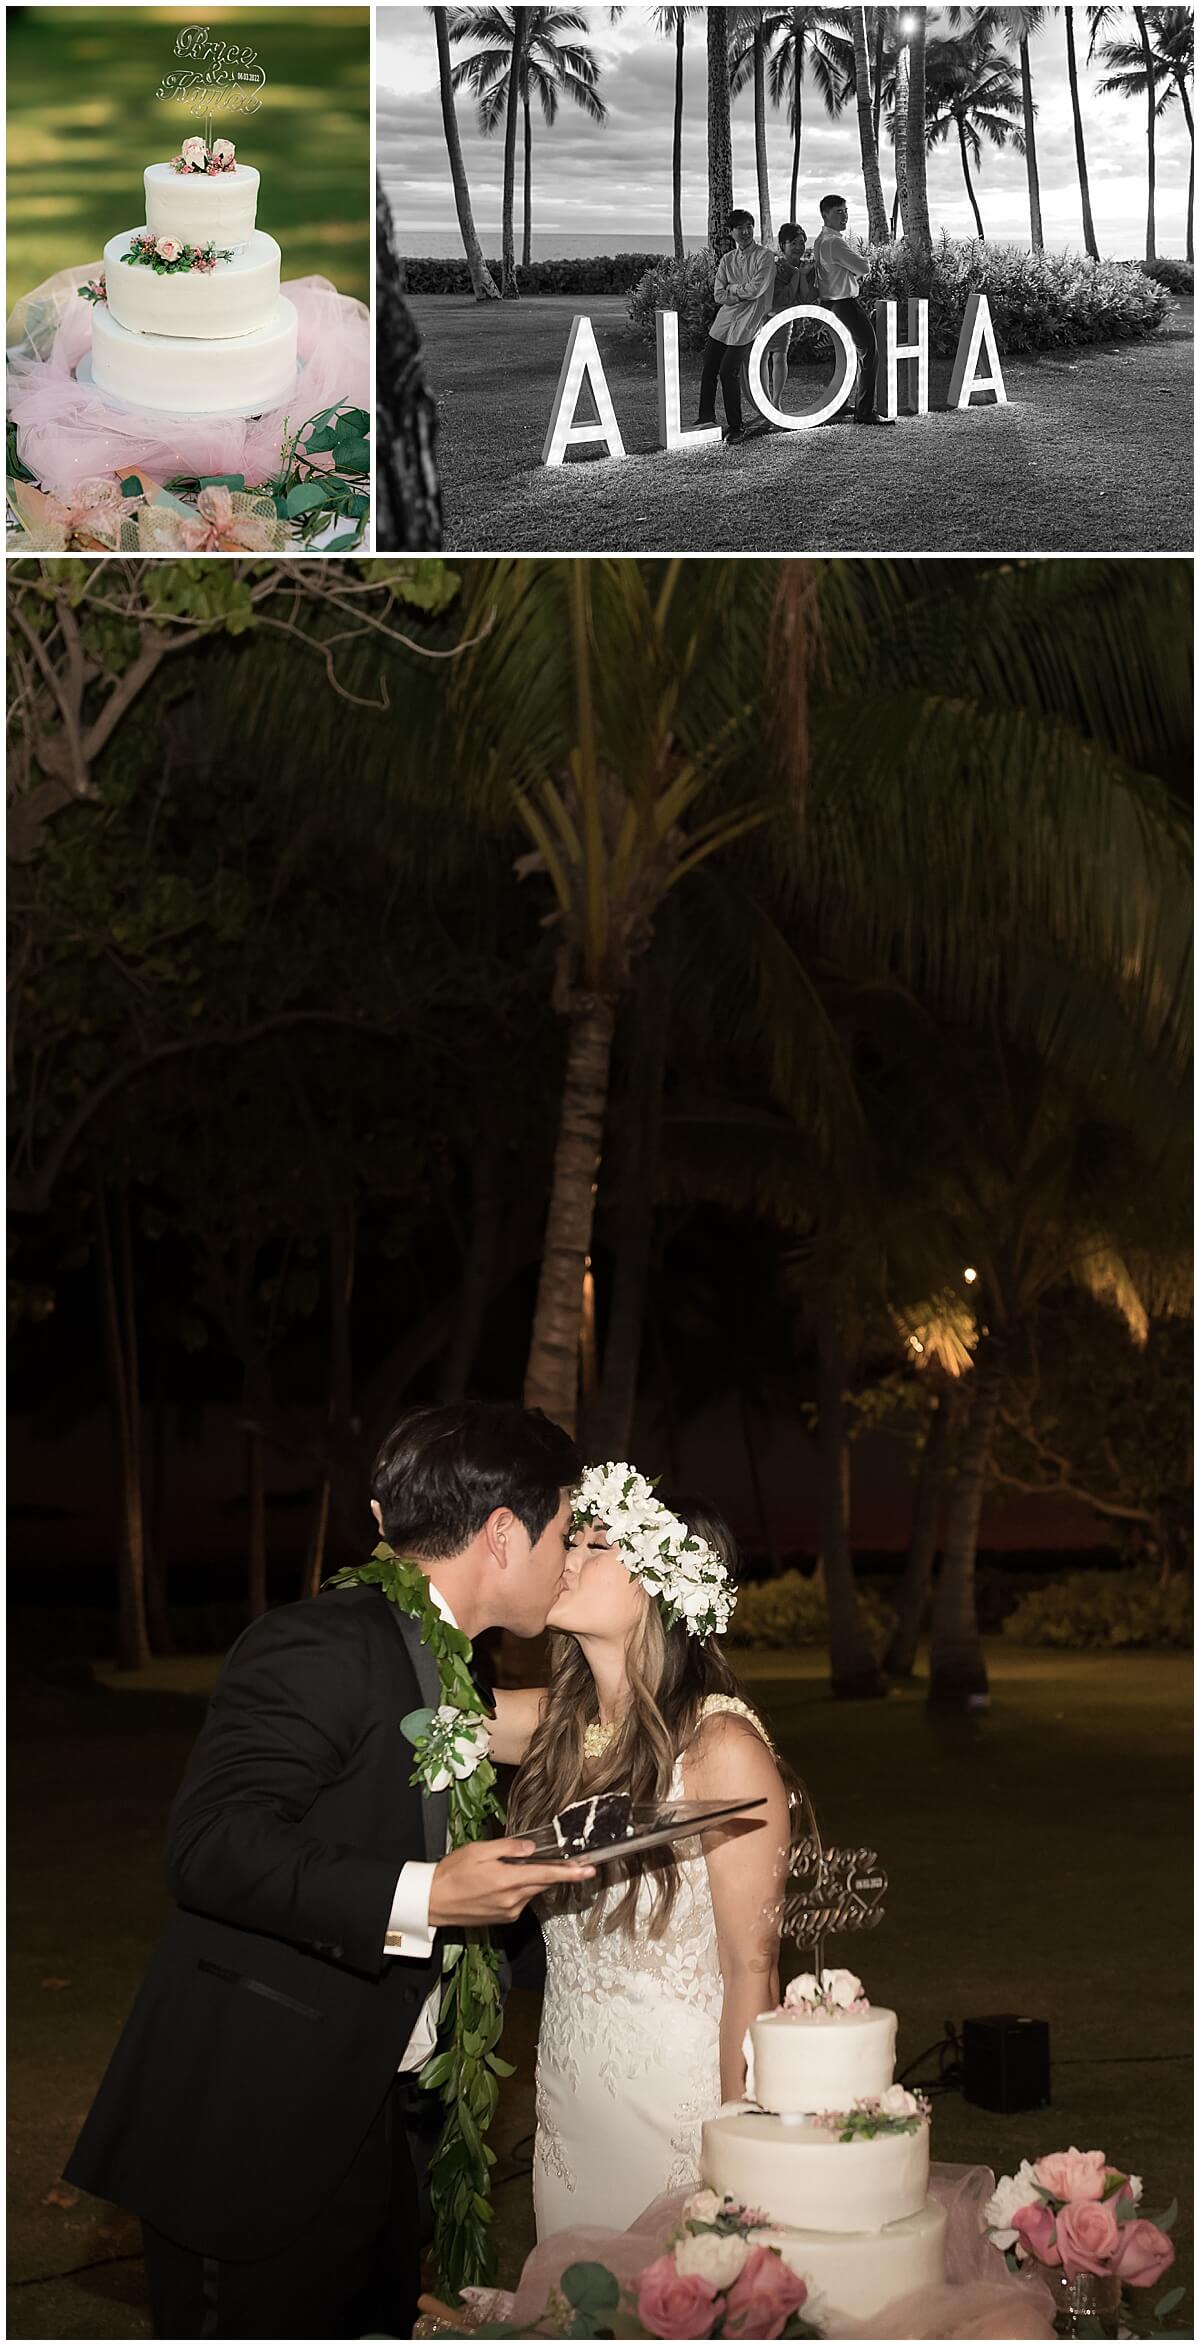 bride and groom cut wedding cake at reception in front of aloha ground sign by Elle rose photo